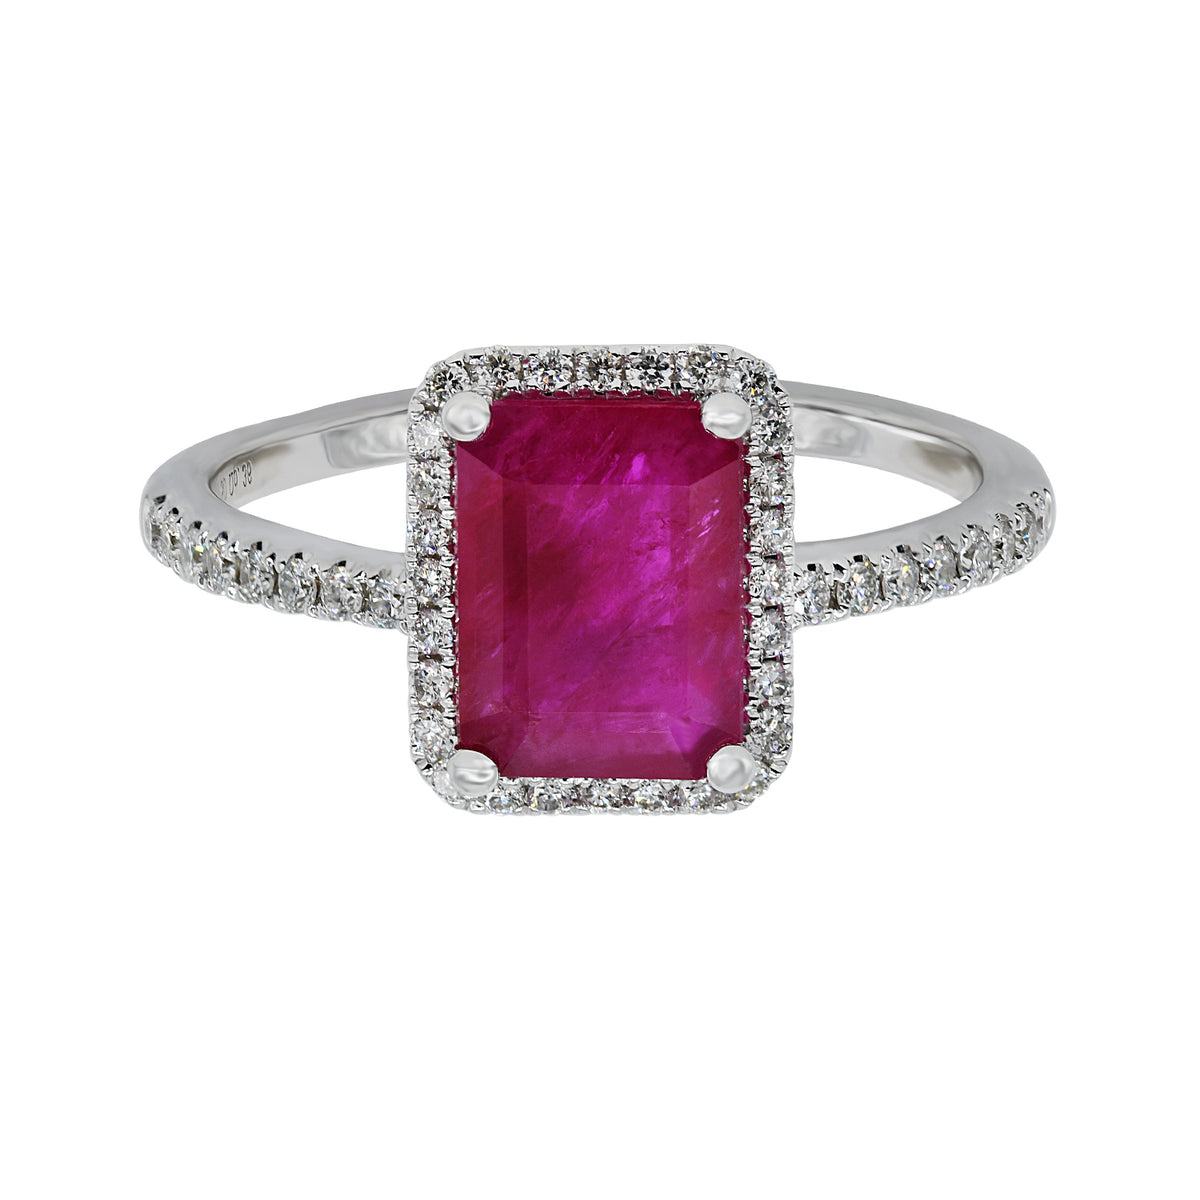 Diamond and Ruby Ring